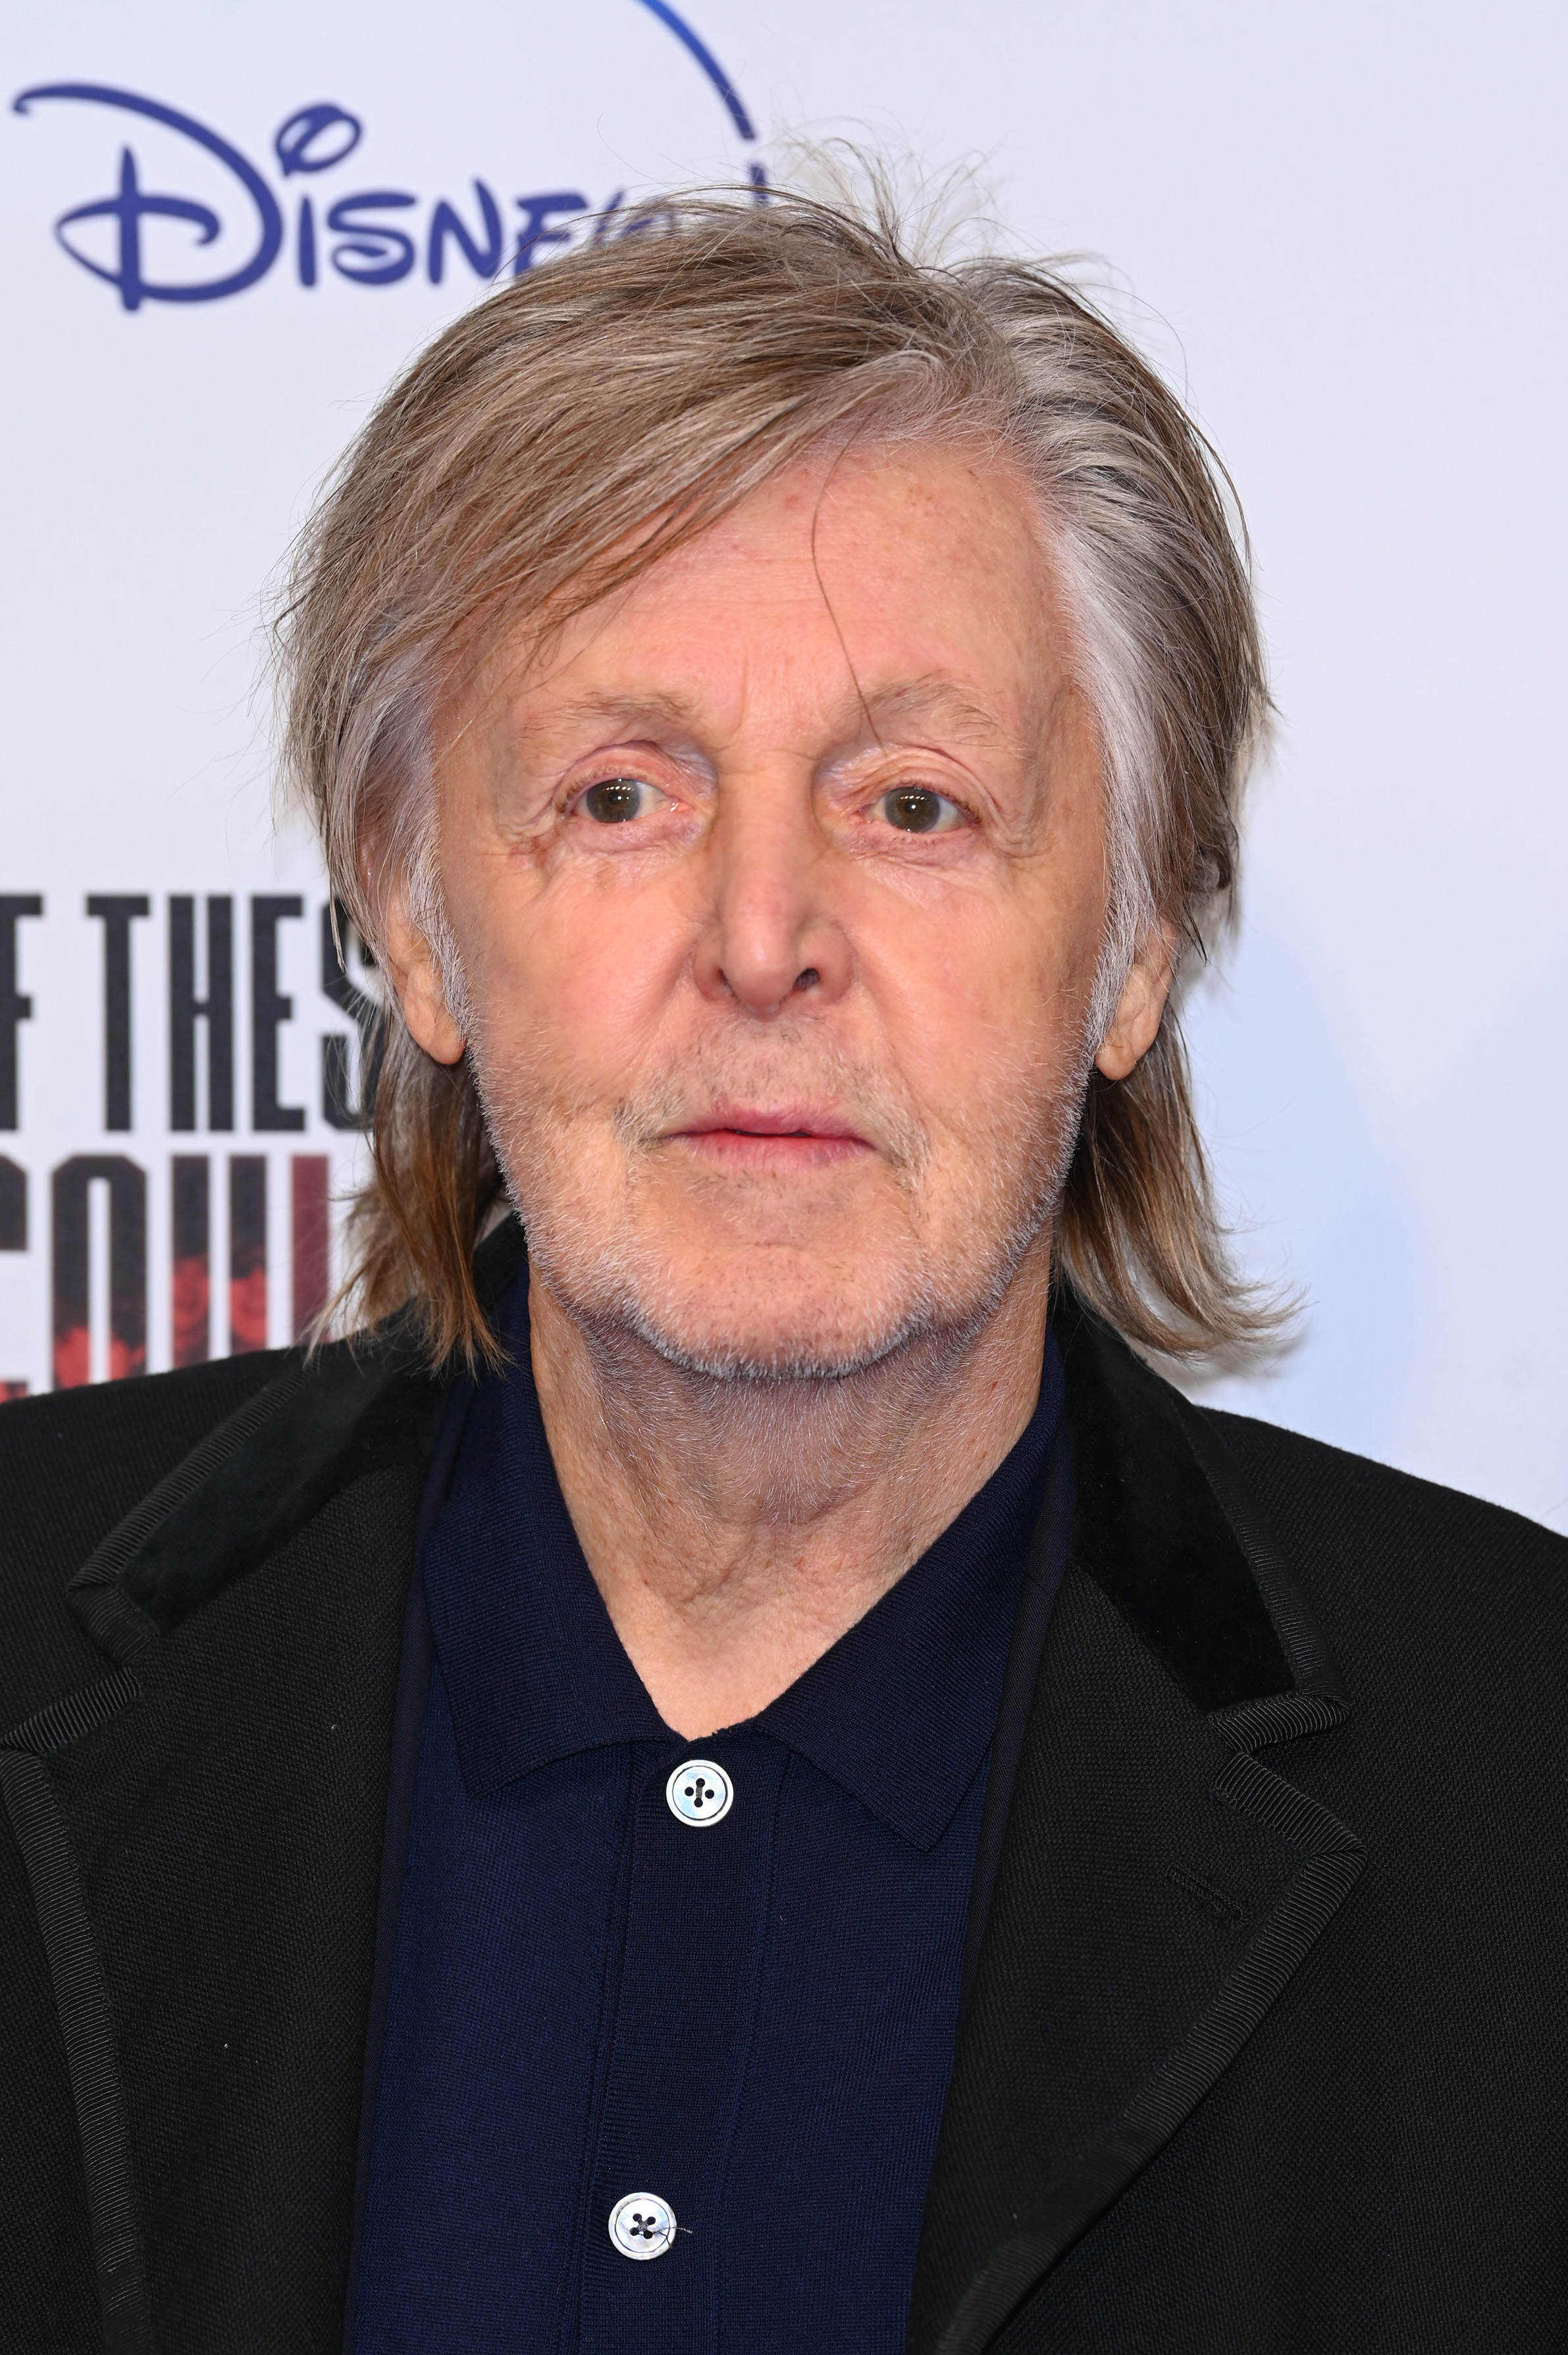 Paul McCartney attends the premiere of "If These Walls Could Sing" on December 12, 2022 in London, England | Source: Getty Images